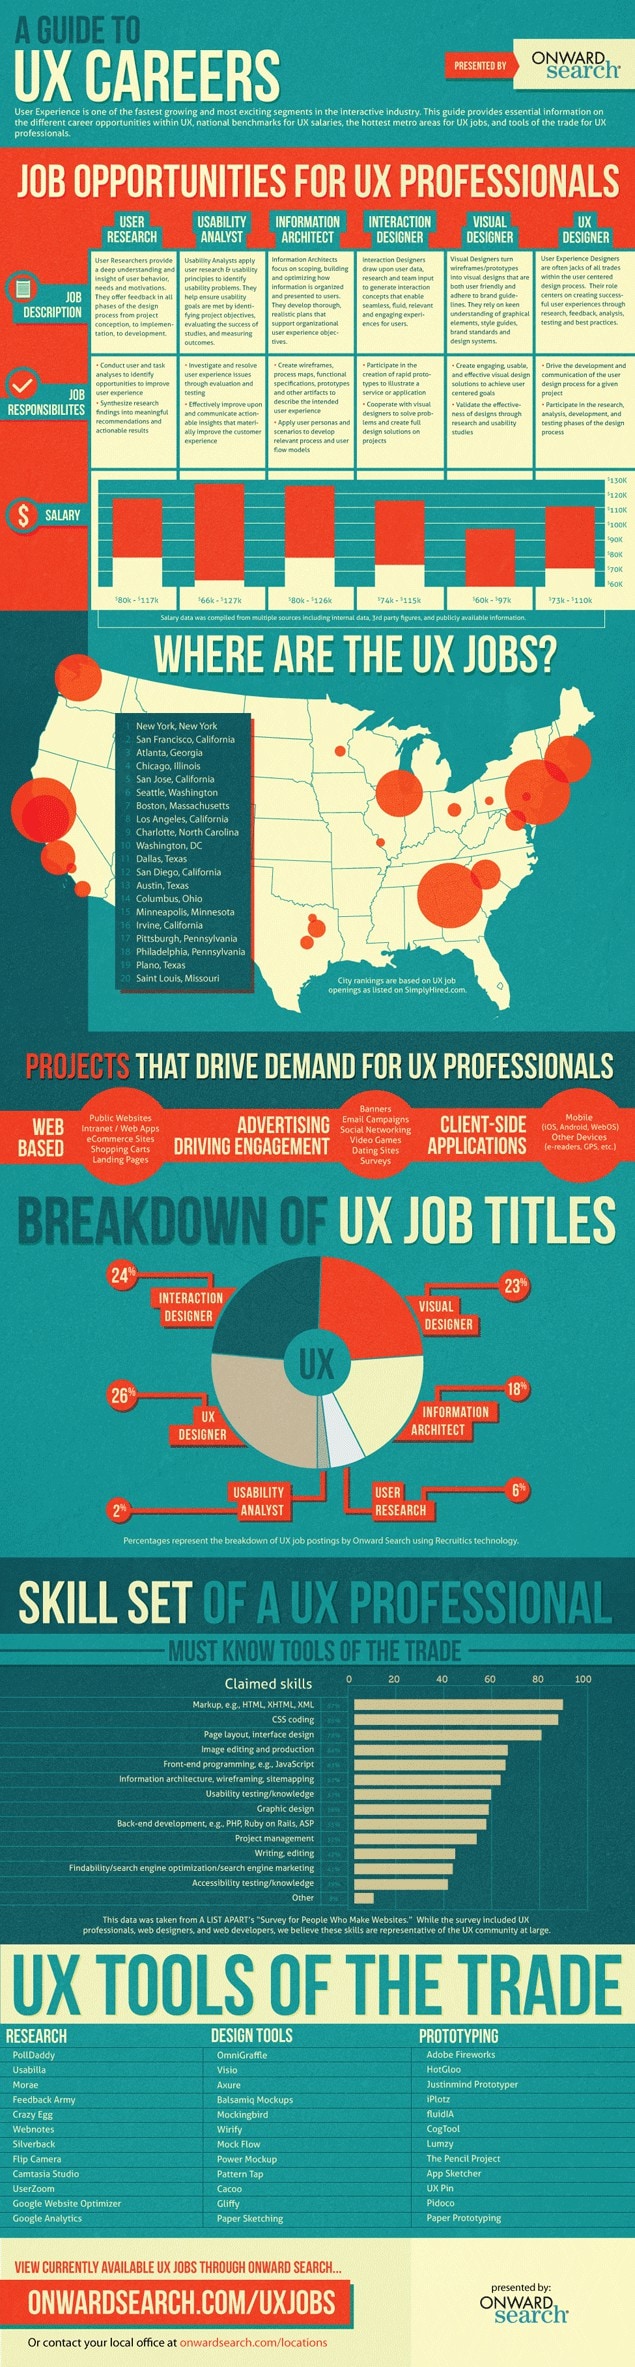 An infographic guide to UX careers